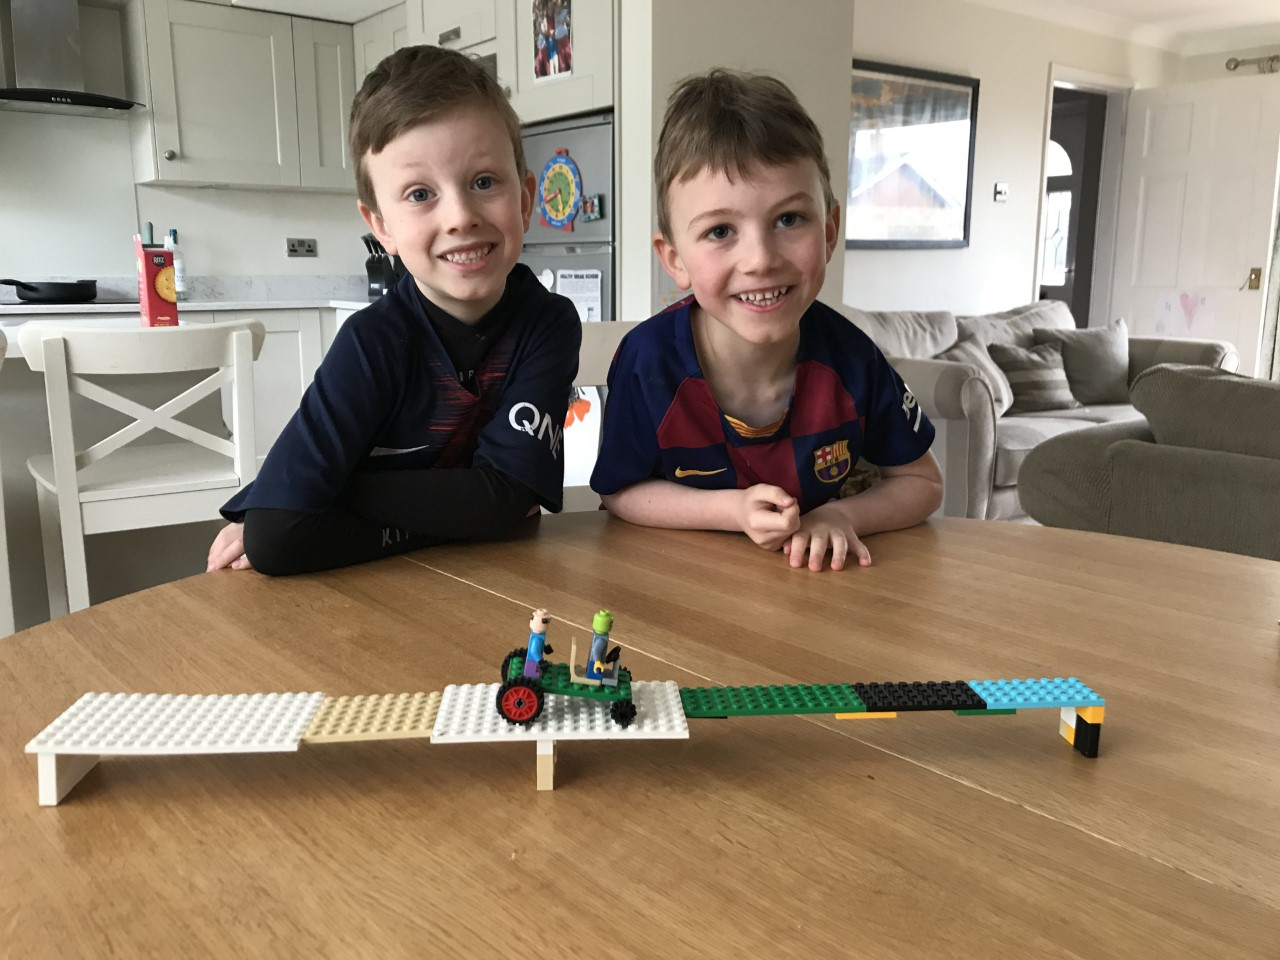 Well done, your Lego bridge is great!